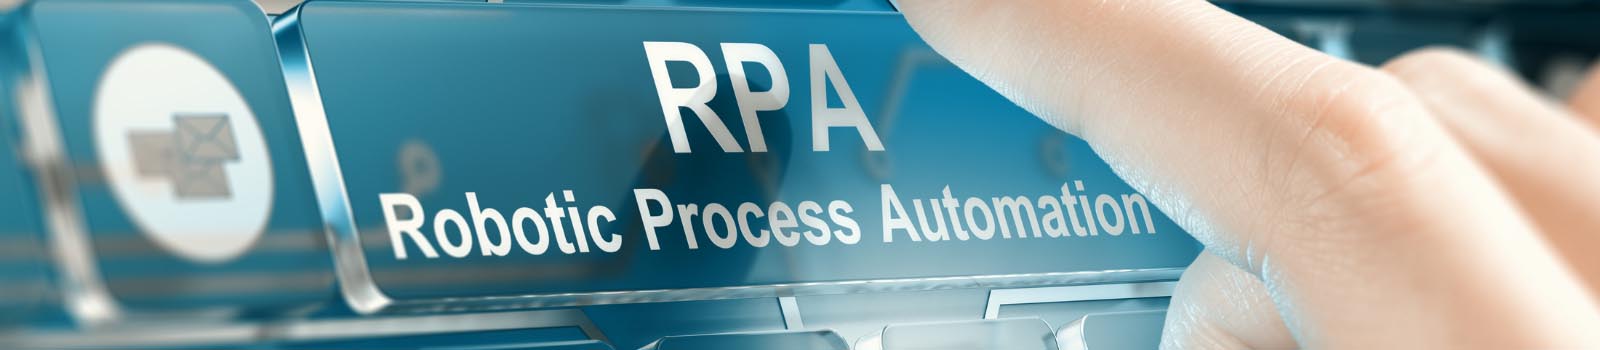 understanding robotic process automation RPA 1